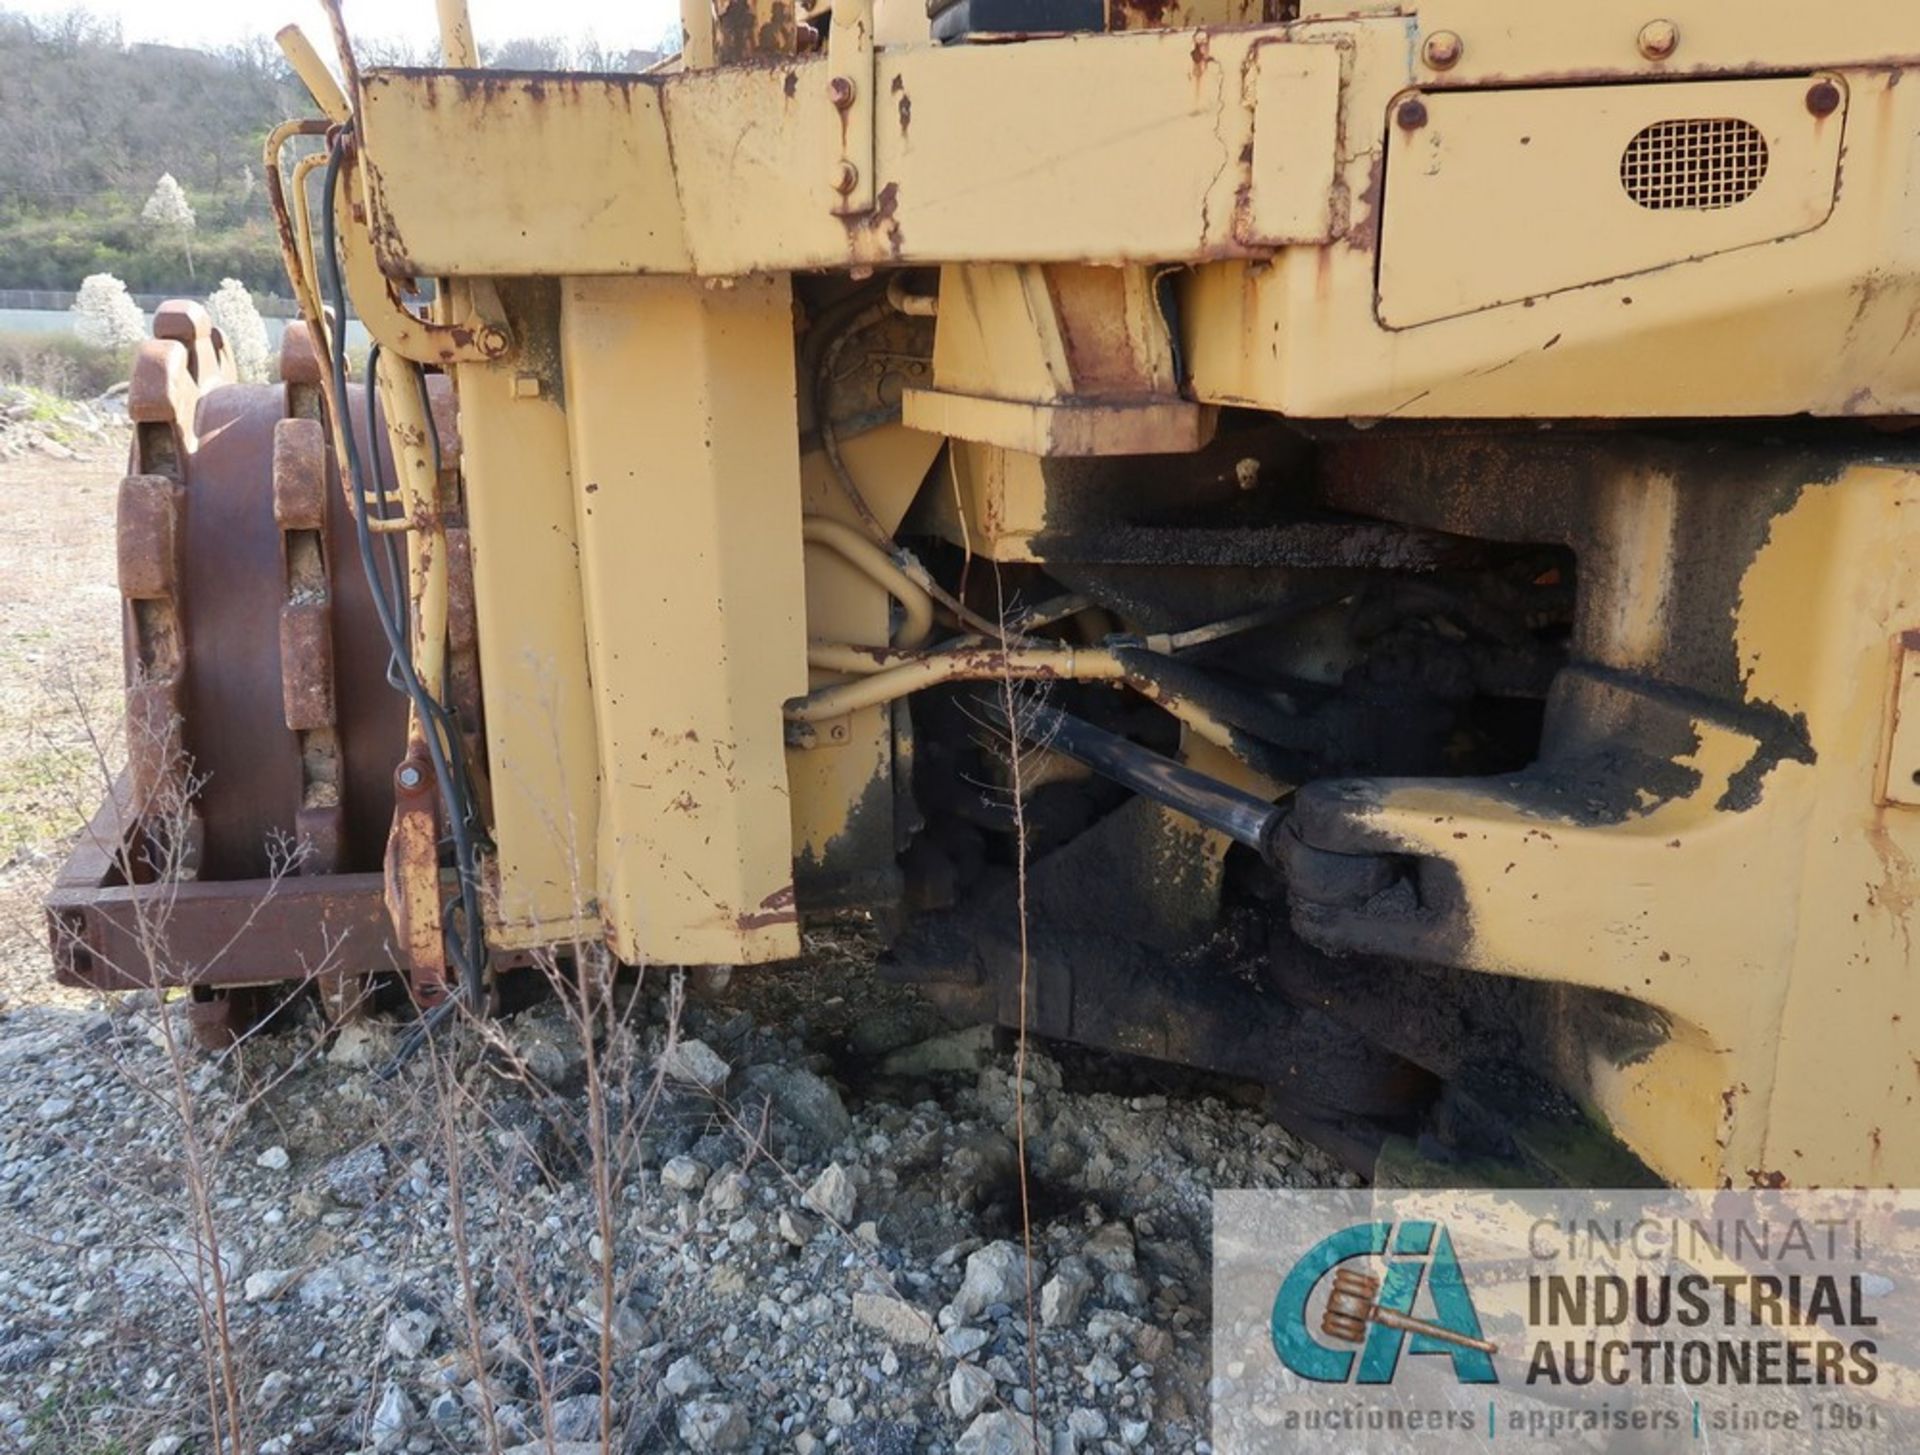 CATERPILLAR MODEL 825B SHEEPS FOOT COMPACTOR; S/N N/A (NEW 1973), 168" STRAIGHT BLADE, 46" WIDE - Image 9 of 16